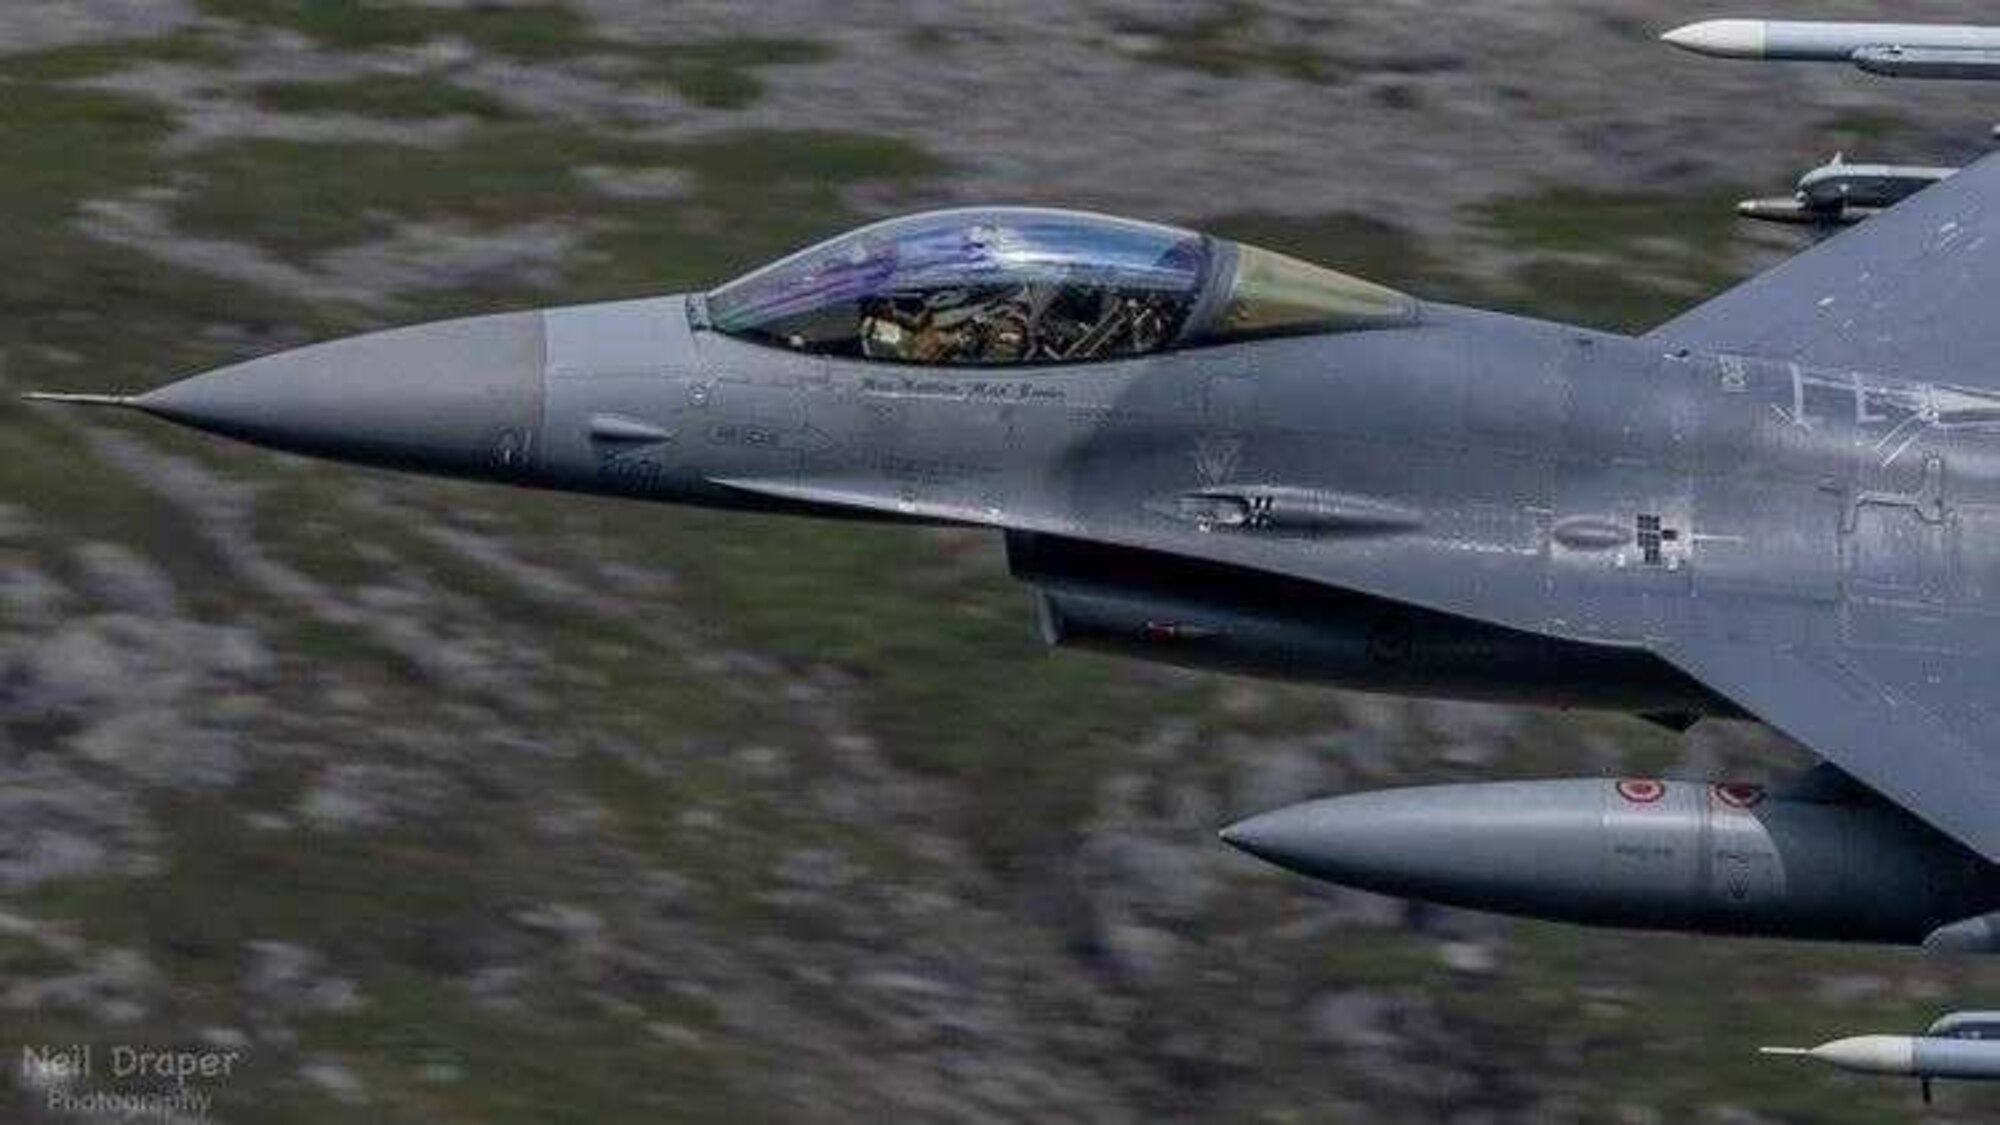 A U.S. Air Force F-16 Fighting Falcon assigned to the 31st Fighter Wing participates in a live fire air-to-air missile training employment event in northwestern Wales, July, 2021. Five F-16s and 36 U.S. Airmen assigned to the 510th Fighter Squadron (FS) and 555th FS conducted live fire air-to-air missile launches with F-15E Strike Eagles from the 494th and 492nd Fighter Squadrons assigned to Royal Air Force (RAF) Lakenheath, England. The training was in coordination with the Aberporth Range Complex in northwestern Wales. (Courtesy Photo)